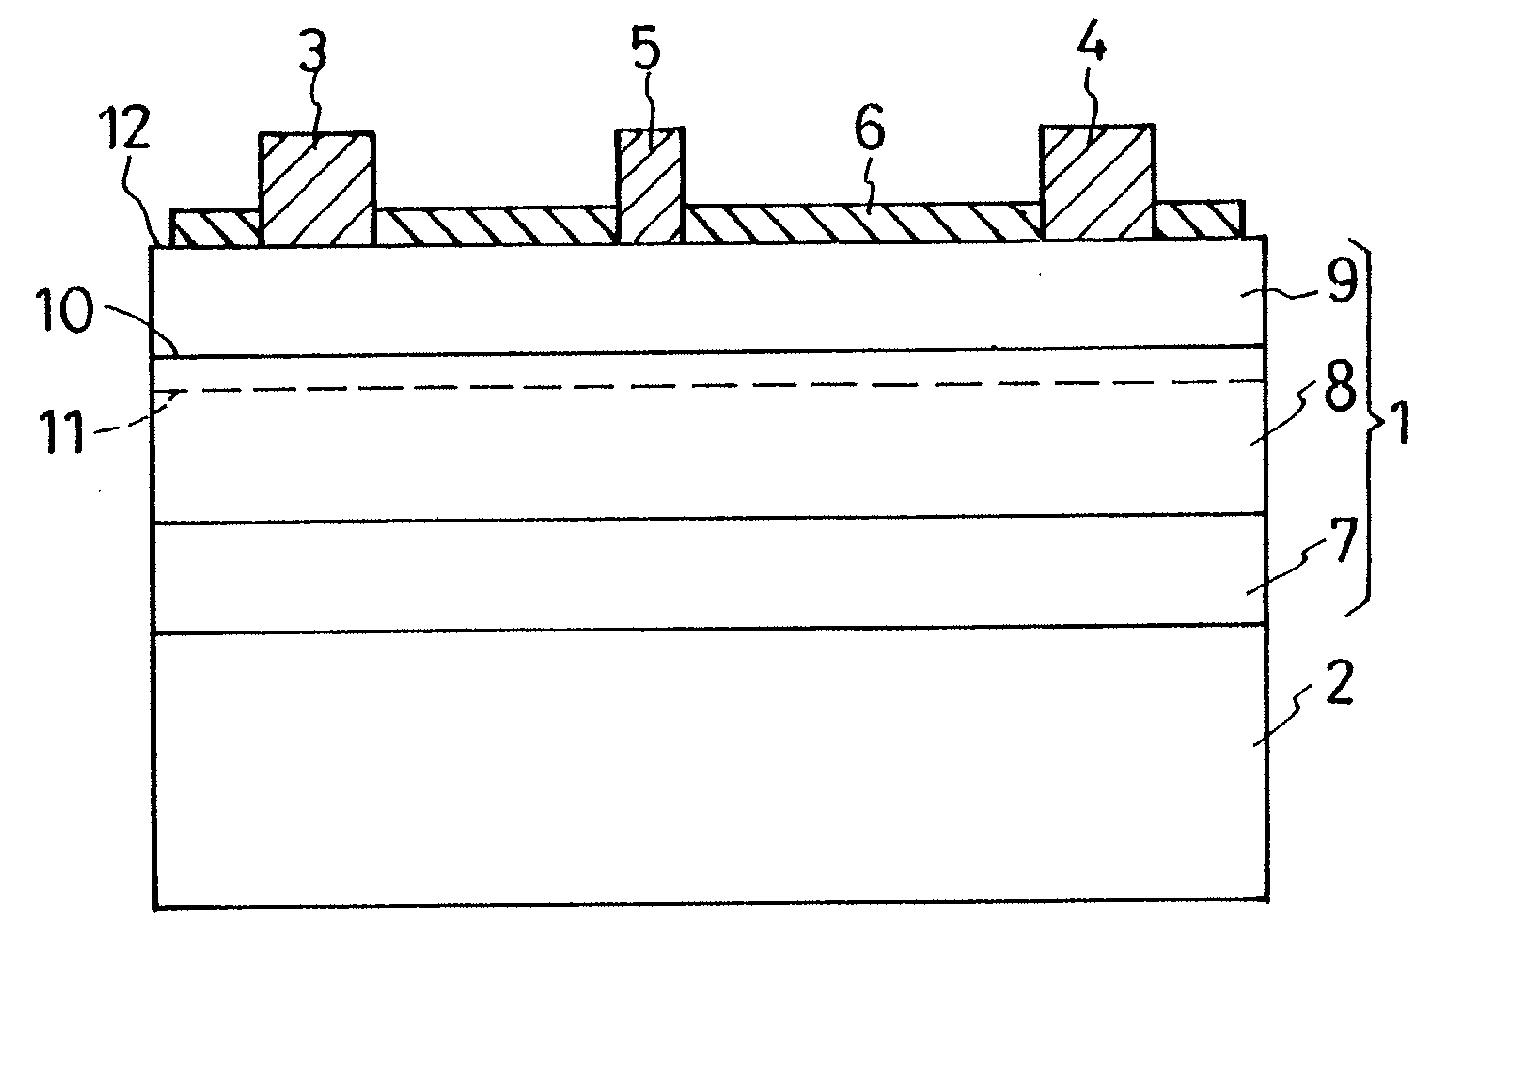 Surface-stabilized semiconductor device